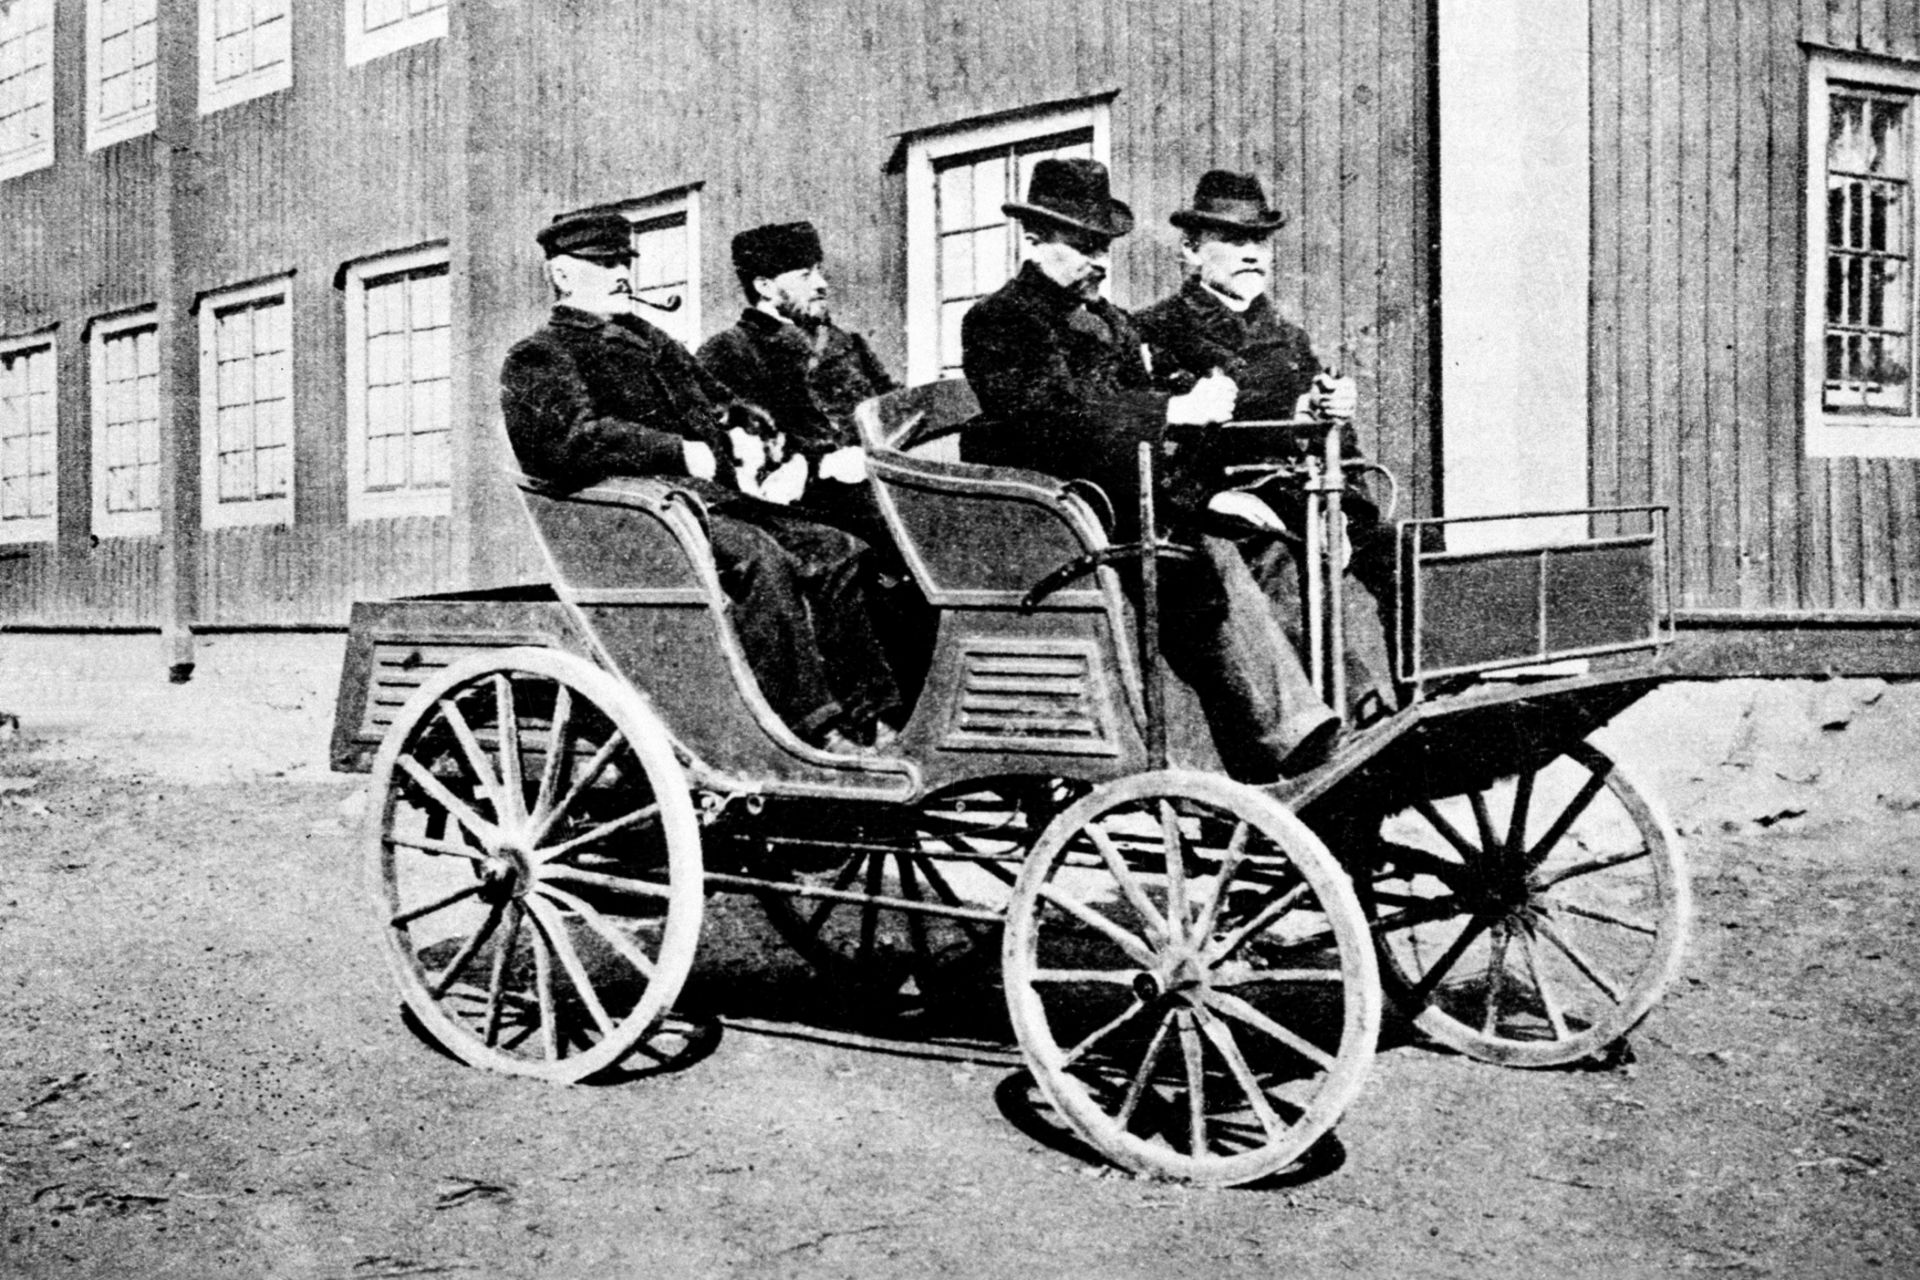 Black and white image of a Vabis A-car from 1897